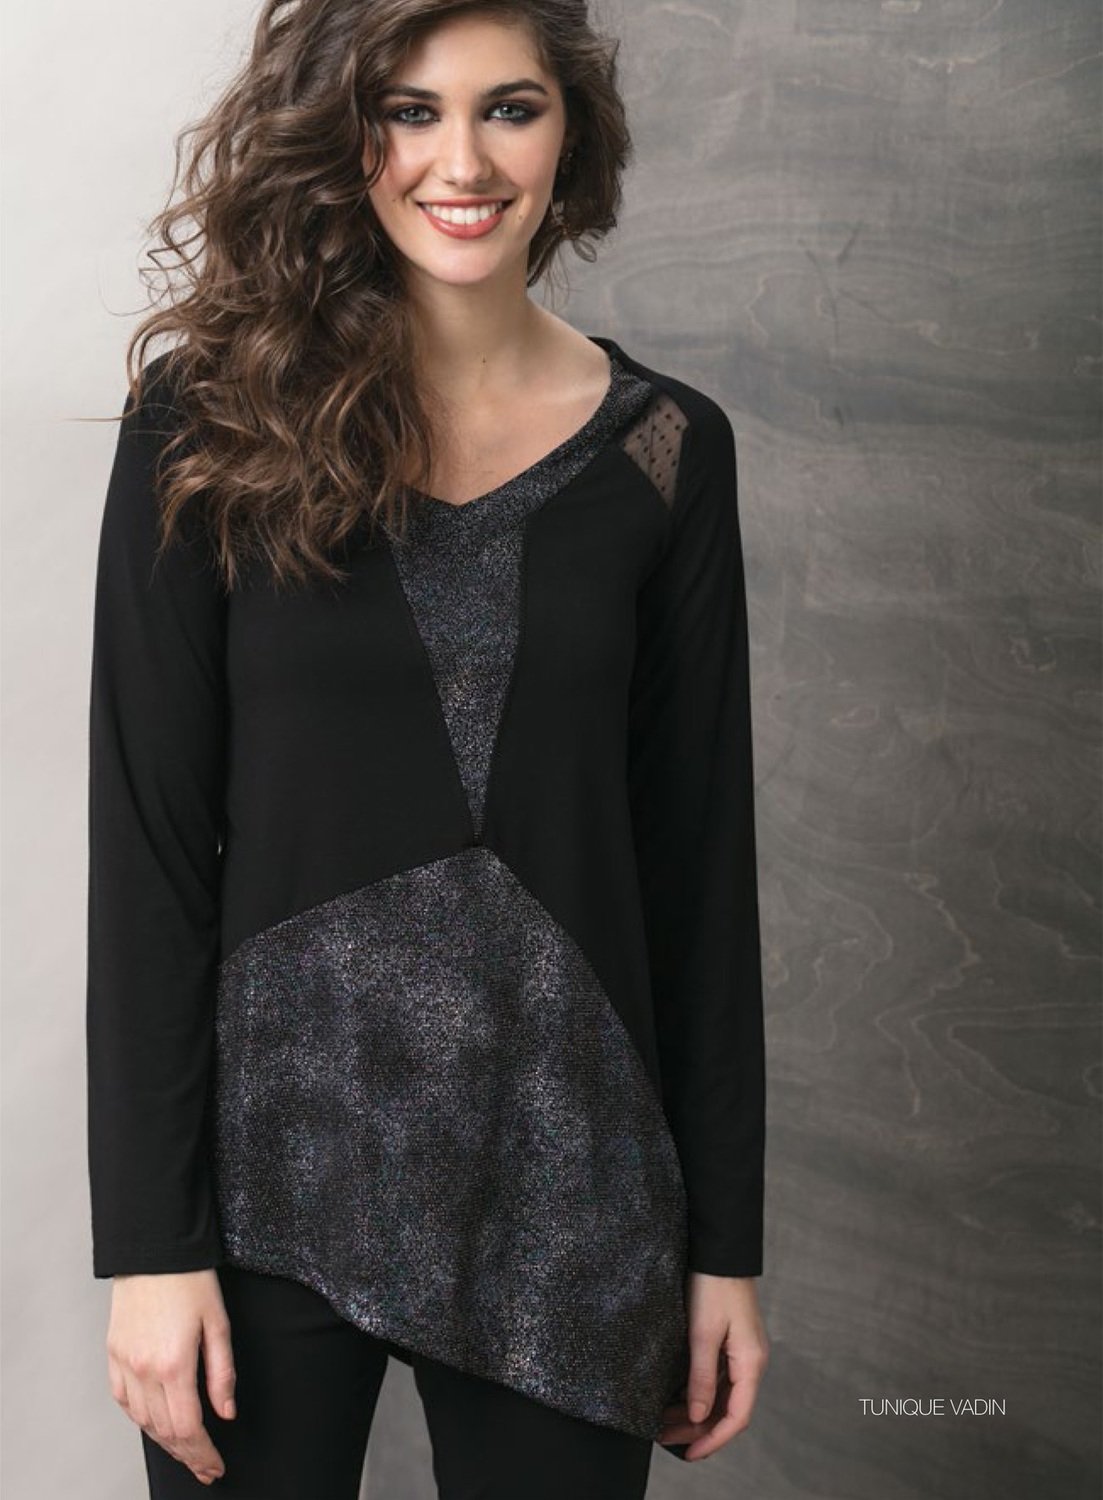 Maloka: Starry Night Asymmetrical Tunic SOLD OUT